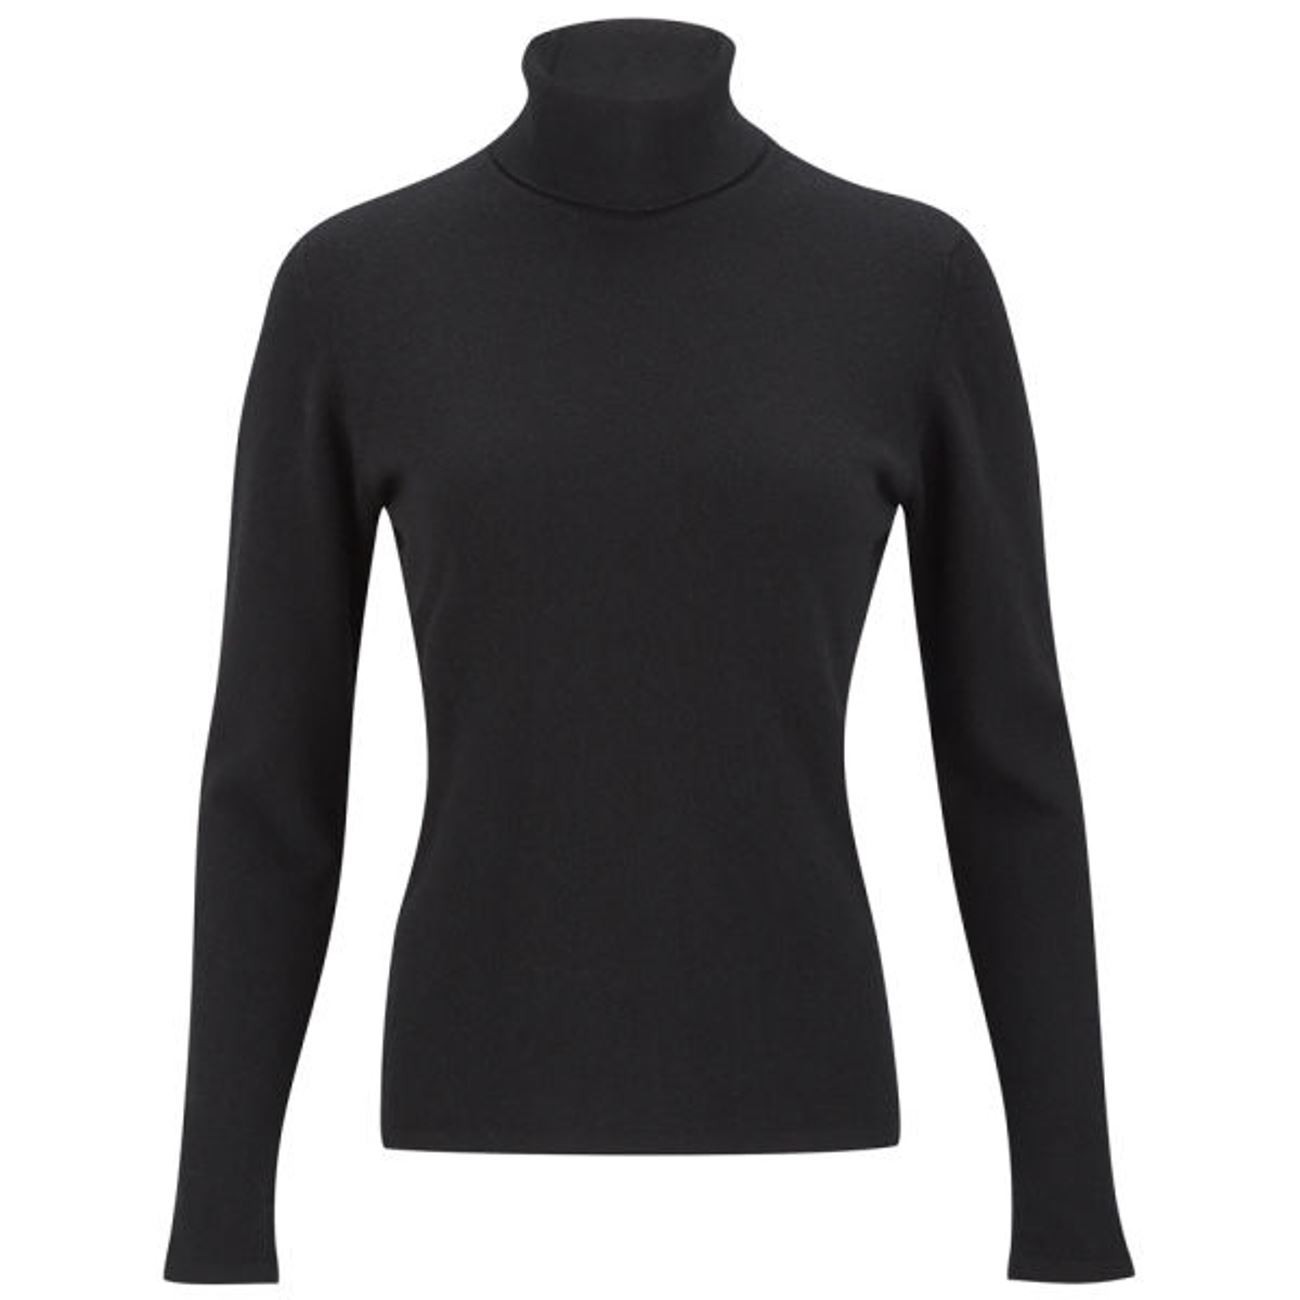 House of Cashmere Ladies' Black Roll Neck - 100% Cashmere Made in Scotland